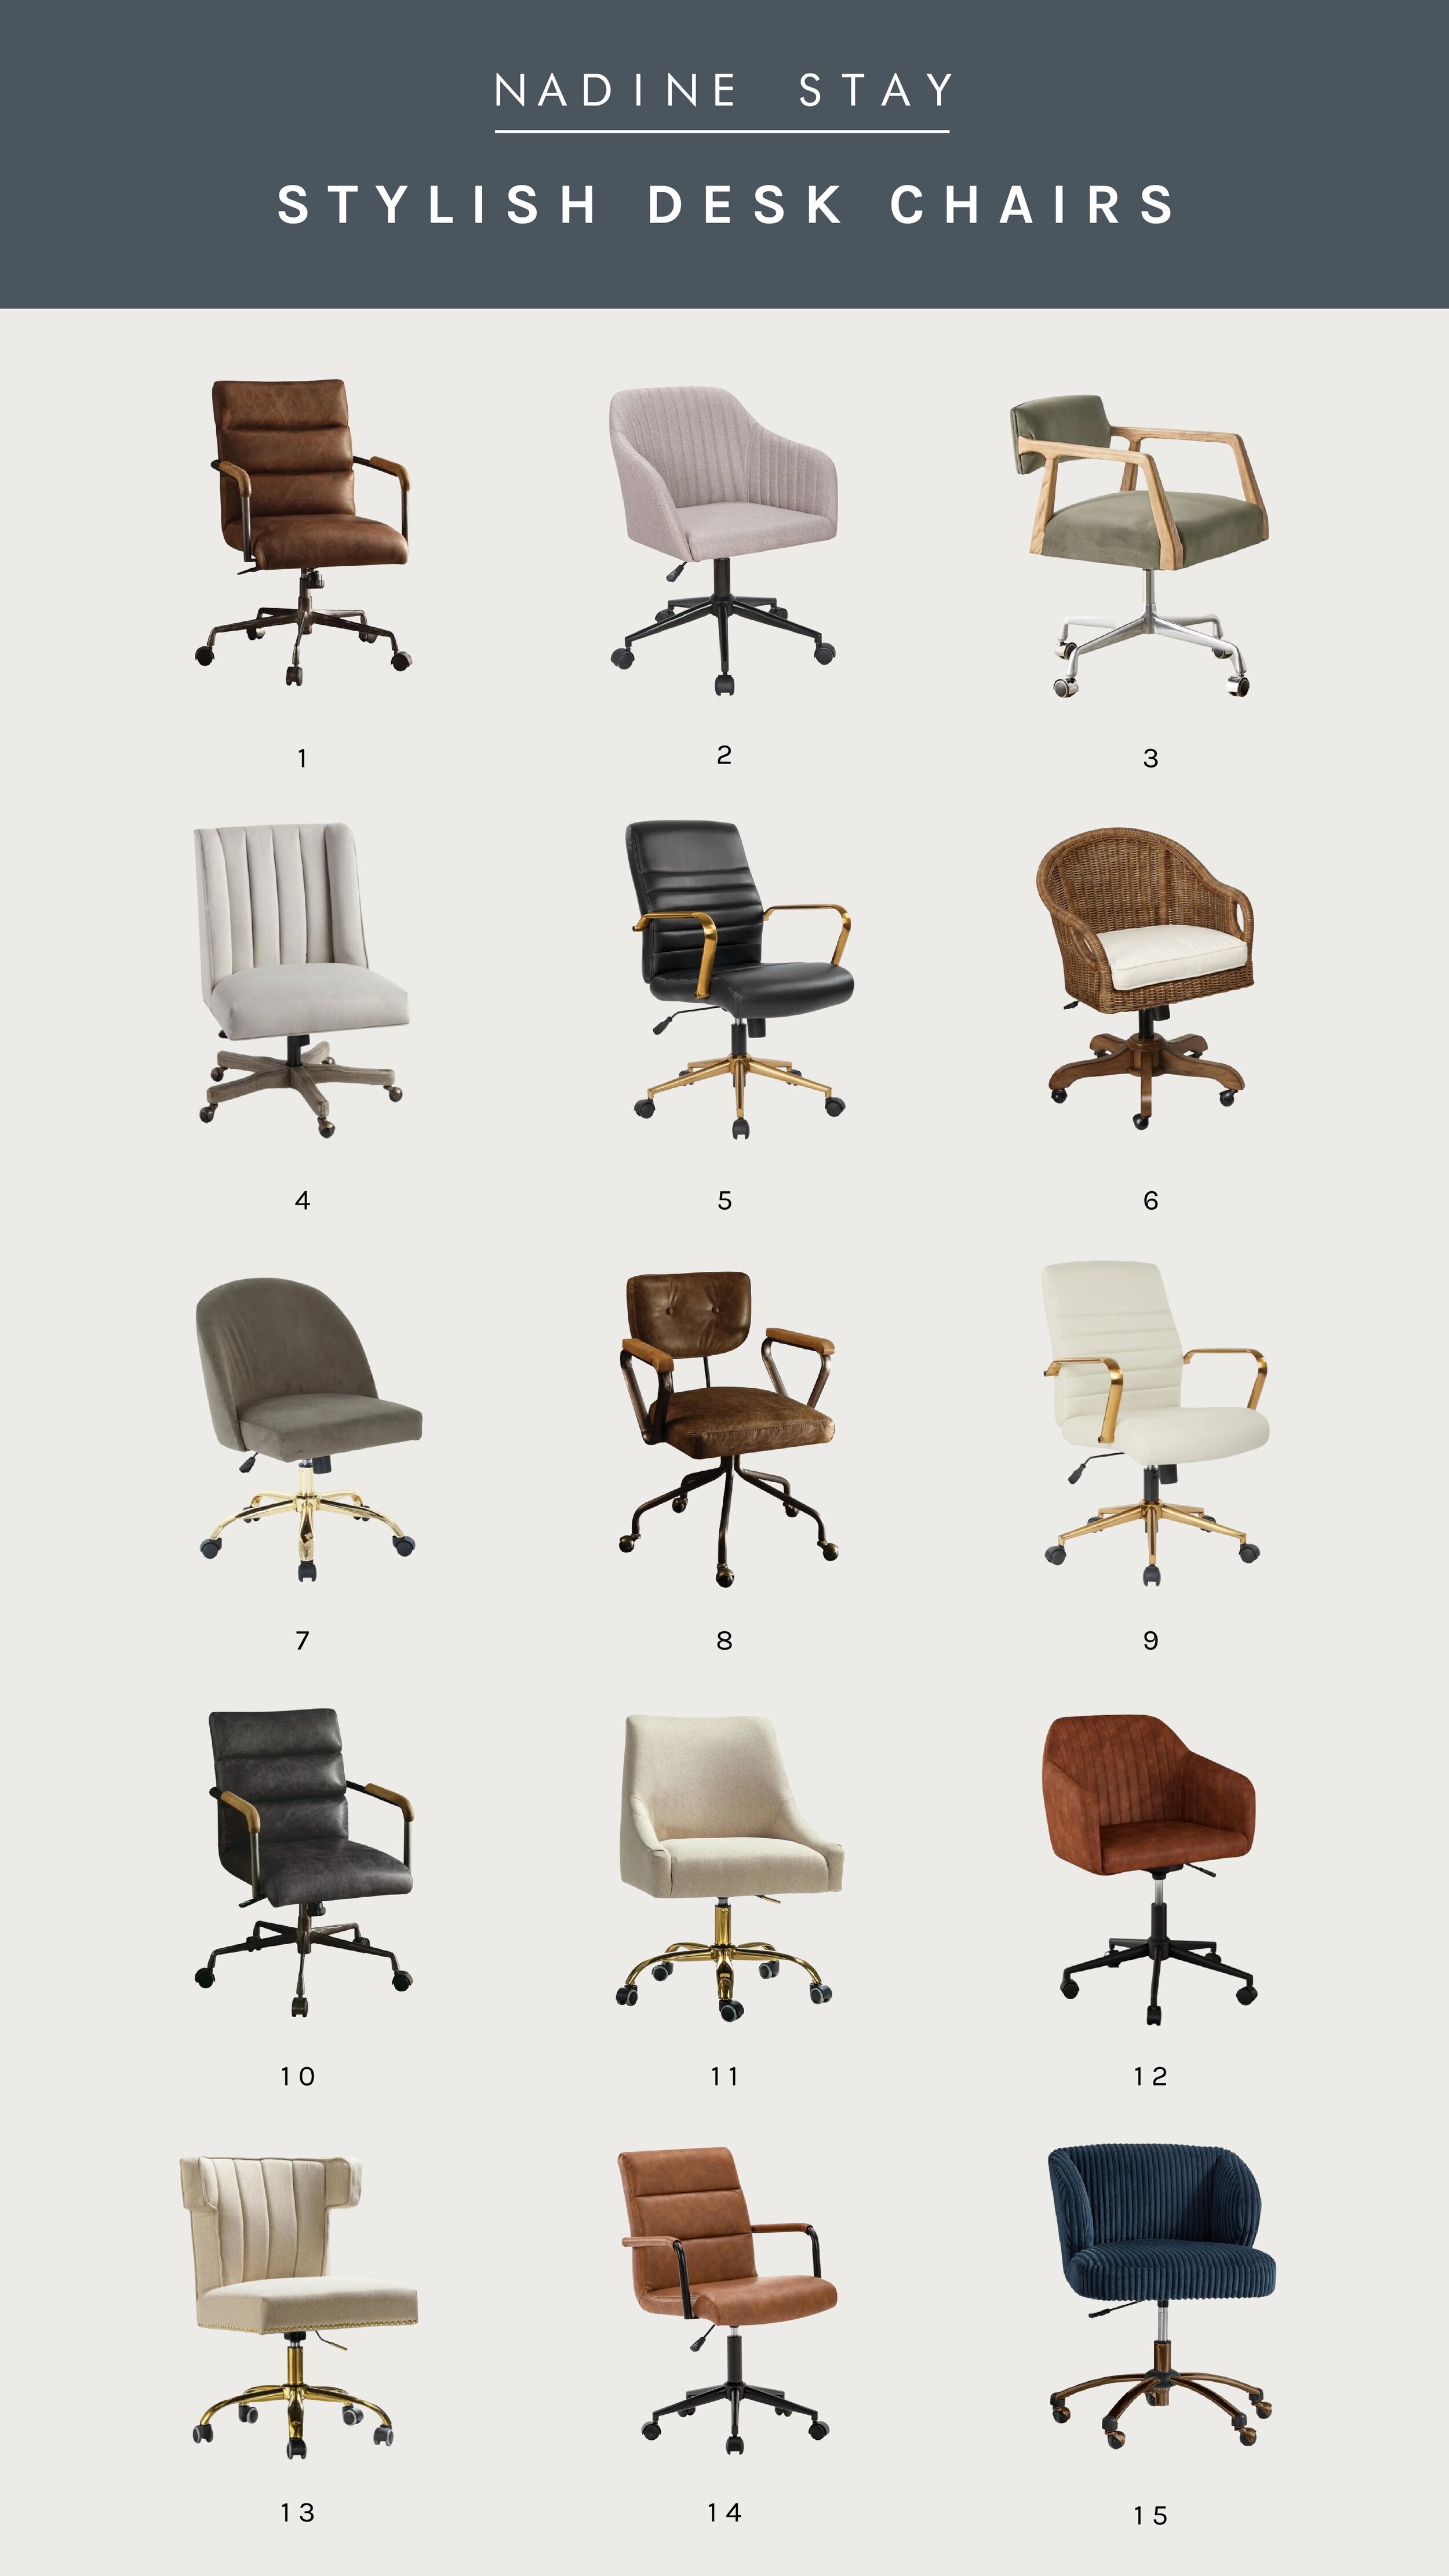 How to pick the right home office desk chair + 15 of my favorite desk chairs with wheels | Nadine Stay - Home office decor and inspiration by Nadine Stay. 15 of the most stylish task chairs and office chairs. Designer tips for finding the right offi…